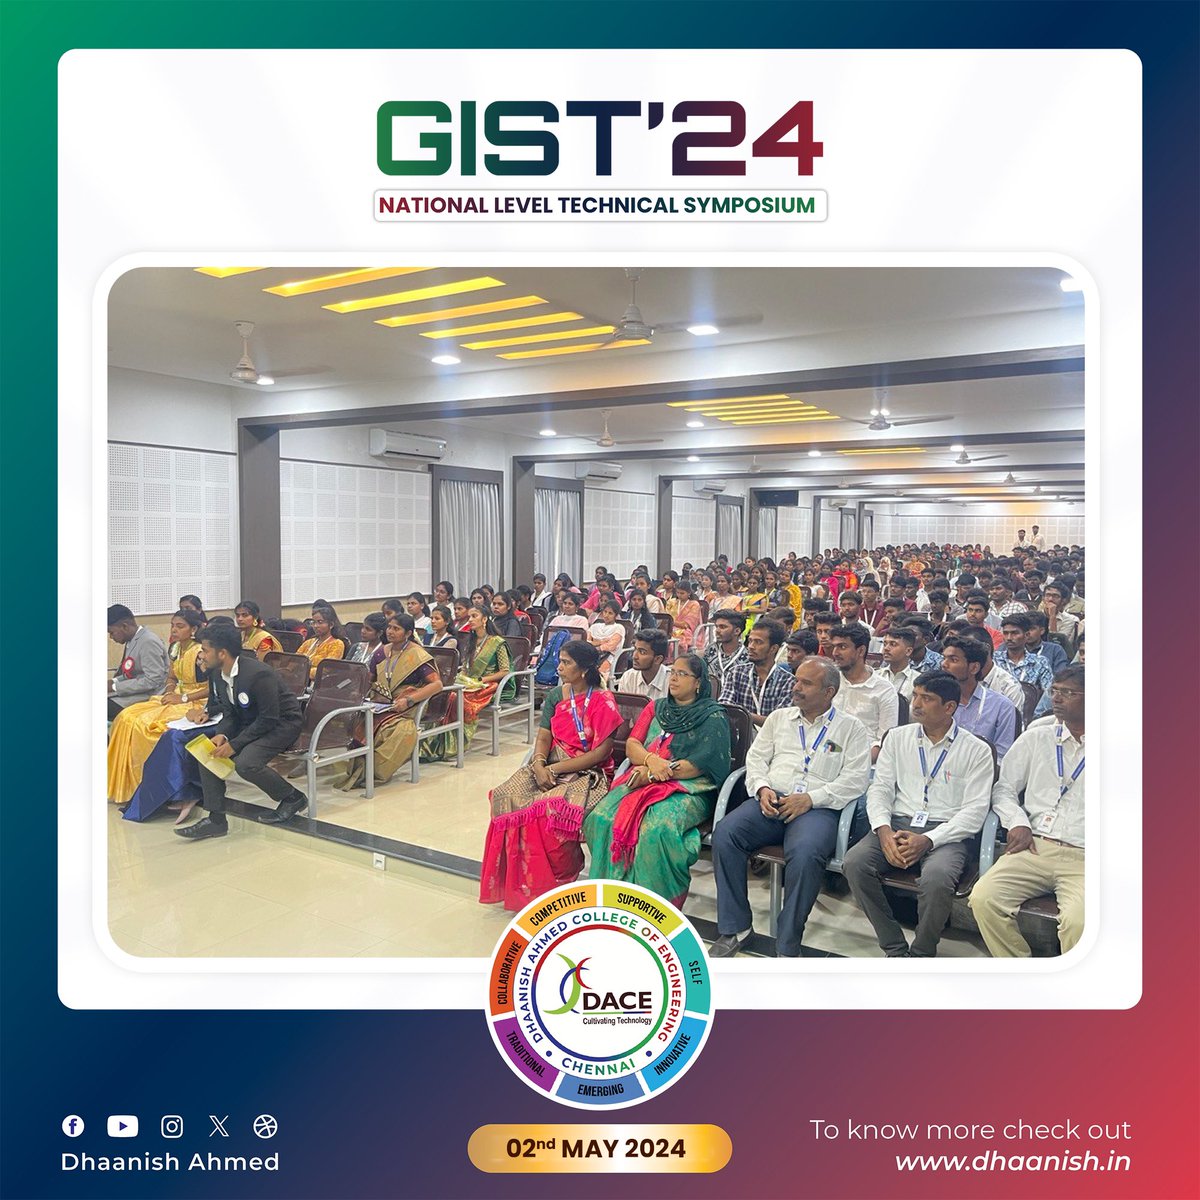 'Capturing the excitement and innovation at 'GIST'24 - Dhaanish Ahmed College of Engineering's National Level Technical Symposium! 🌟 #GIST24 #InnovationUnleashed #TechnicalExcellence'